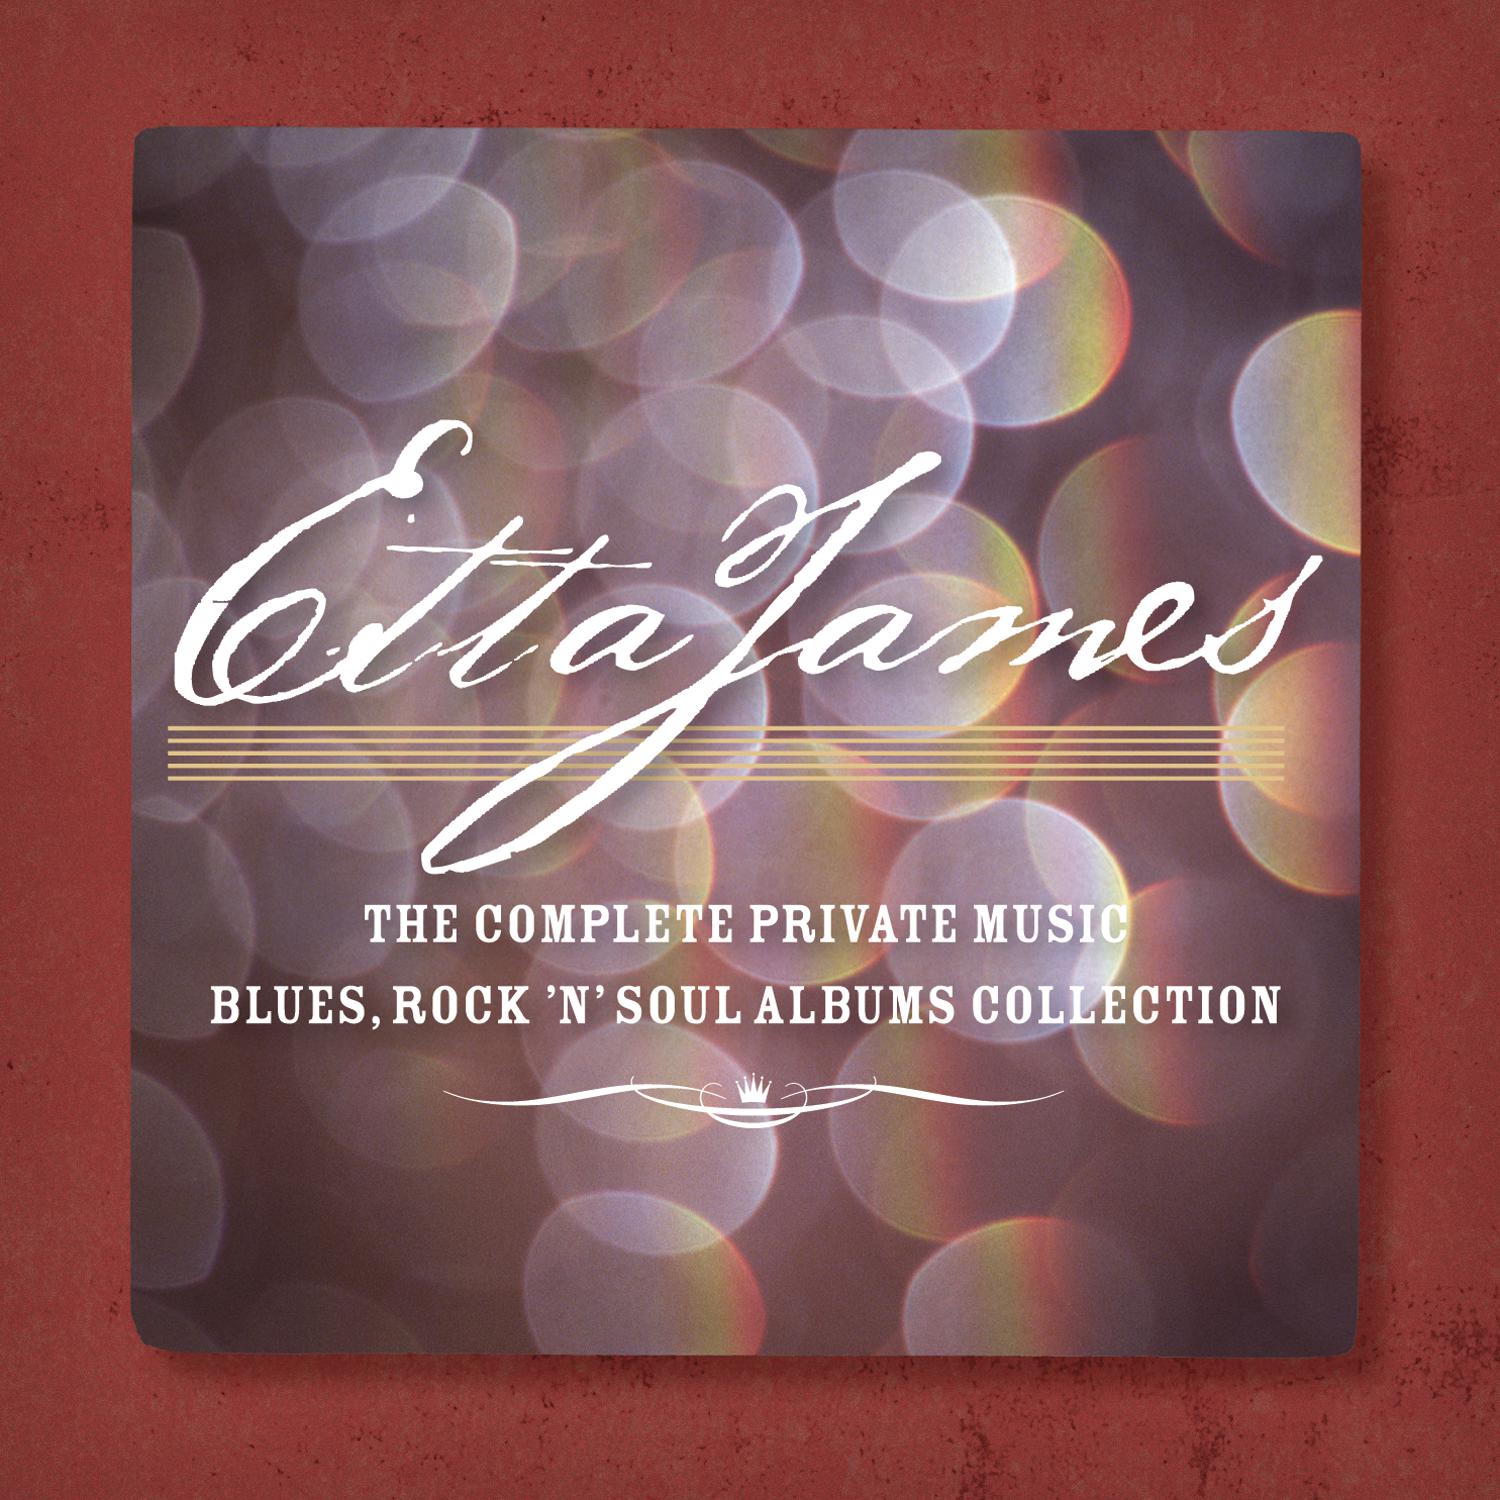 The Complete Blues, Rock ‘n’ Soul Private Music Albums Collection